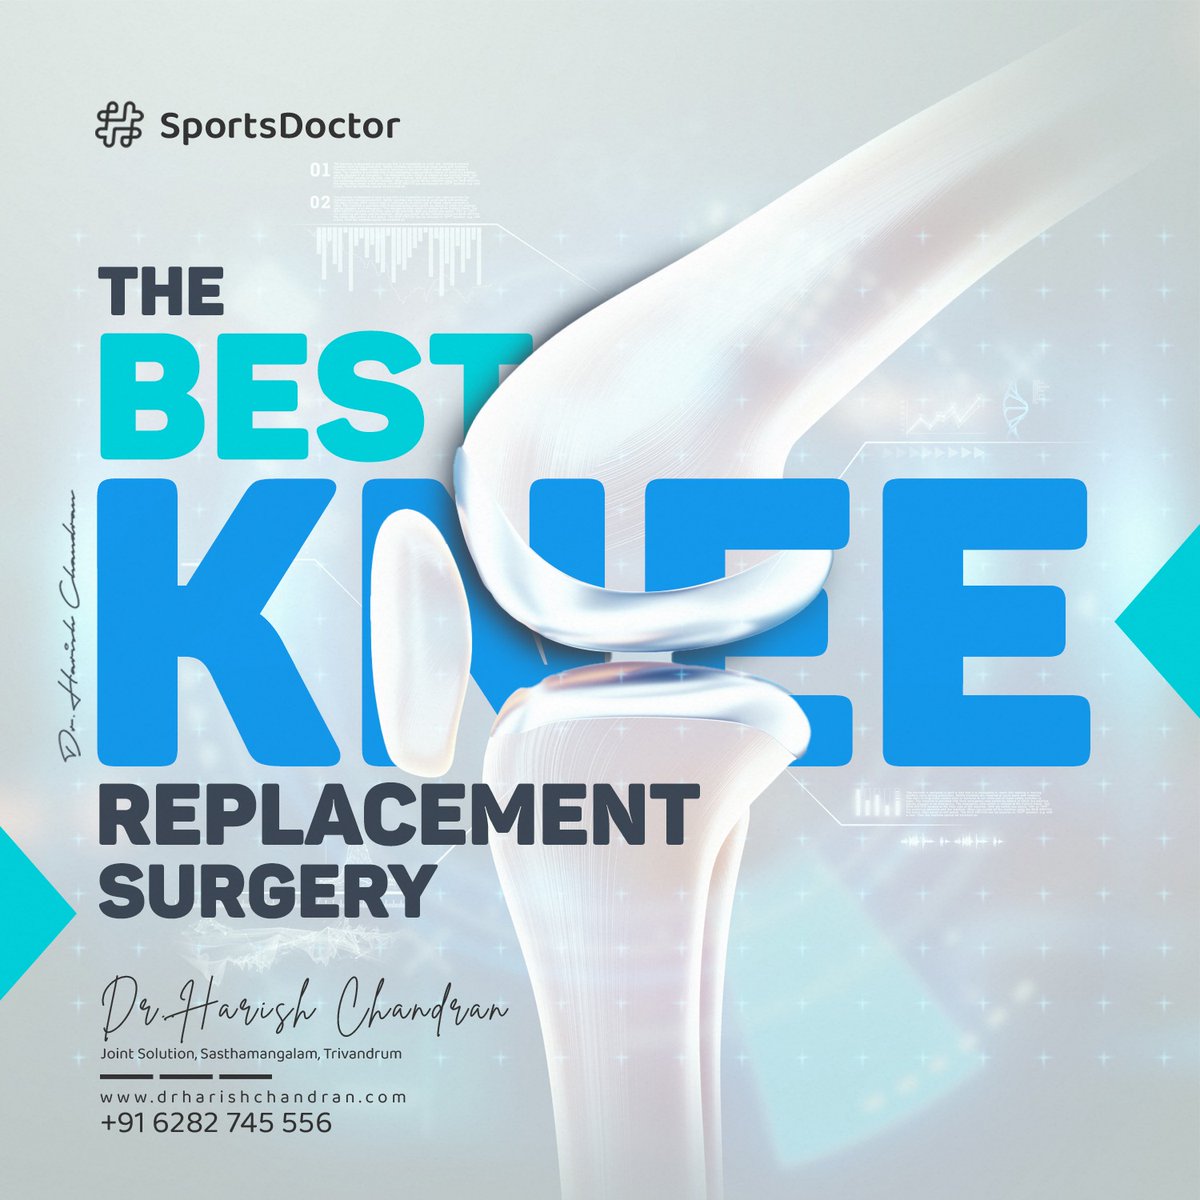 Select your doctor carefully. The expertise of the doctor and the quality of the facility are crucial factors for the success and recovery rate of knee replacement surgery.

#orthopedic #kneepain #kneejoint #kneeanatomy #kneearthritis #boneonbone #physicaltherapy